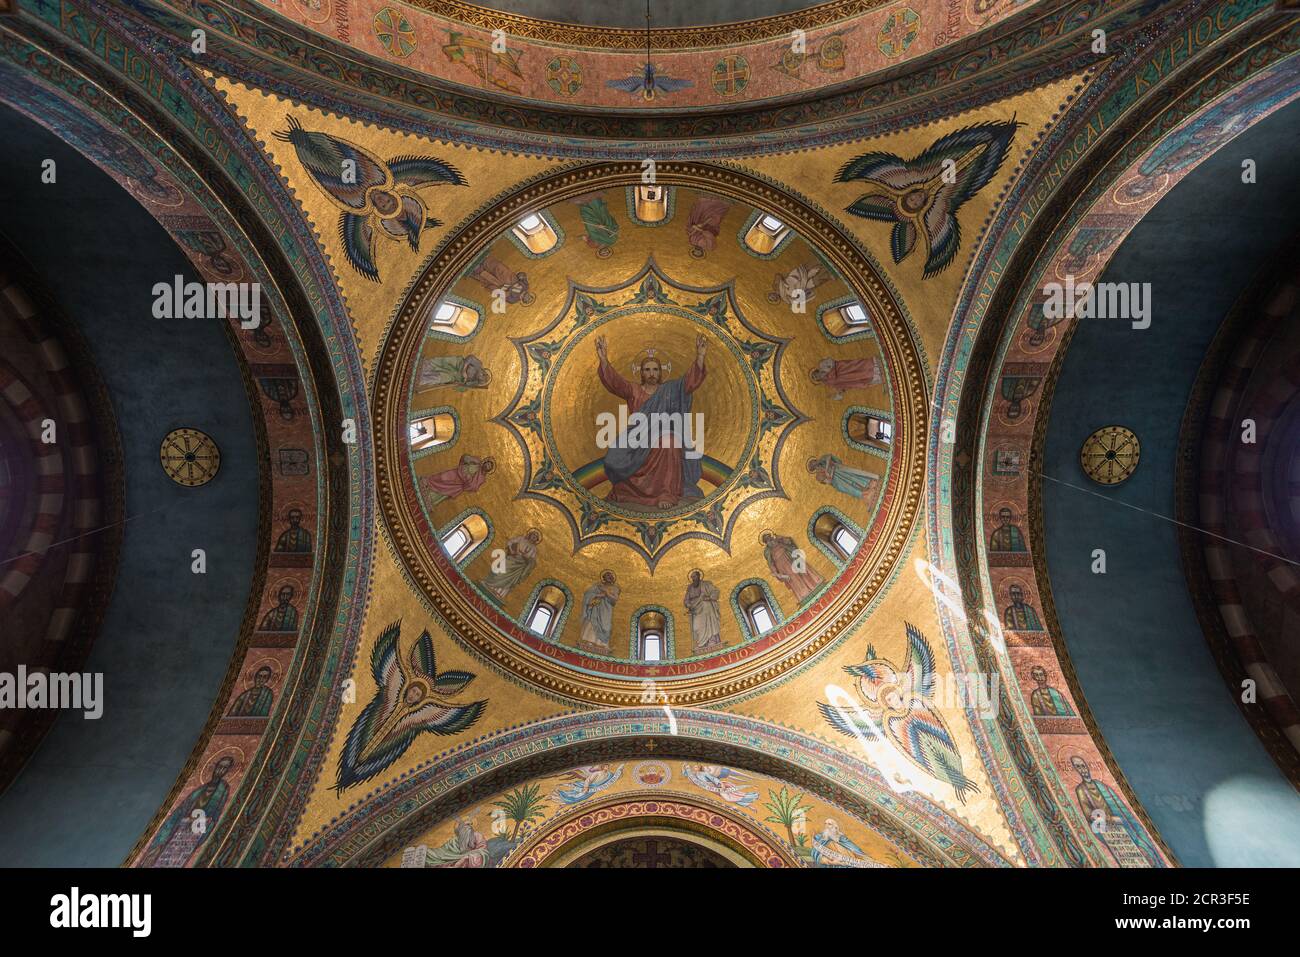 The interior of St Sophia's Greek Orthodox Cathedral in Bayswater, London, United Kingdom Stock Photo